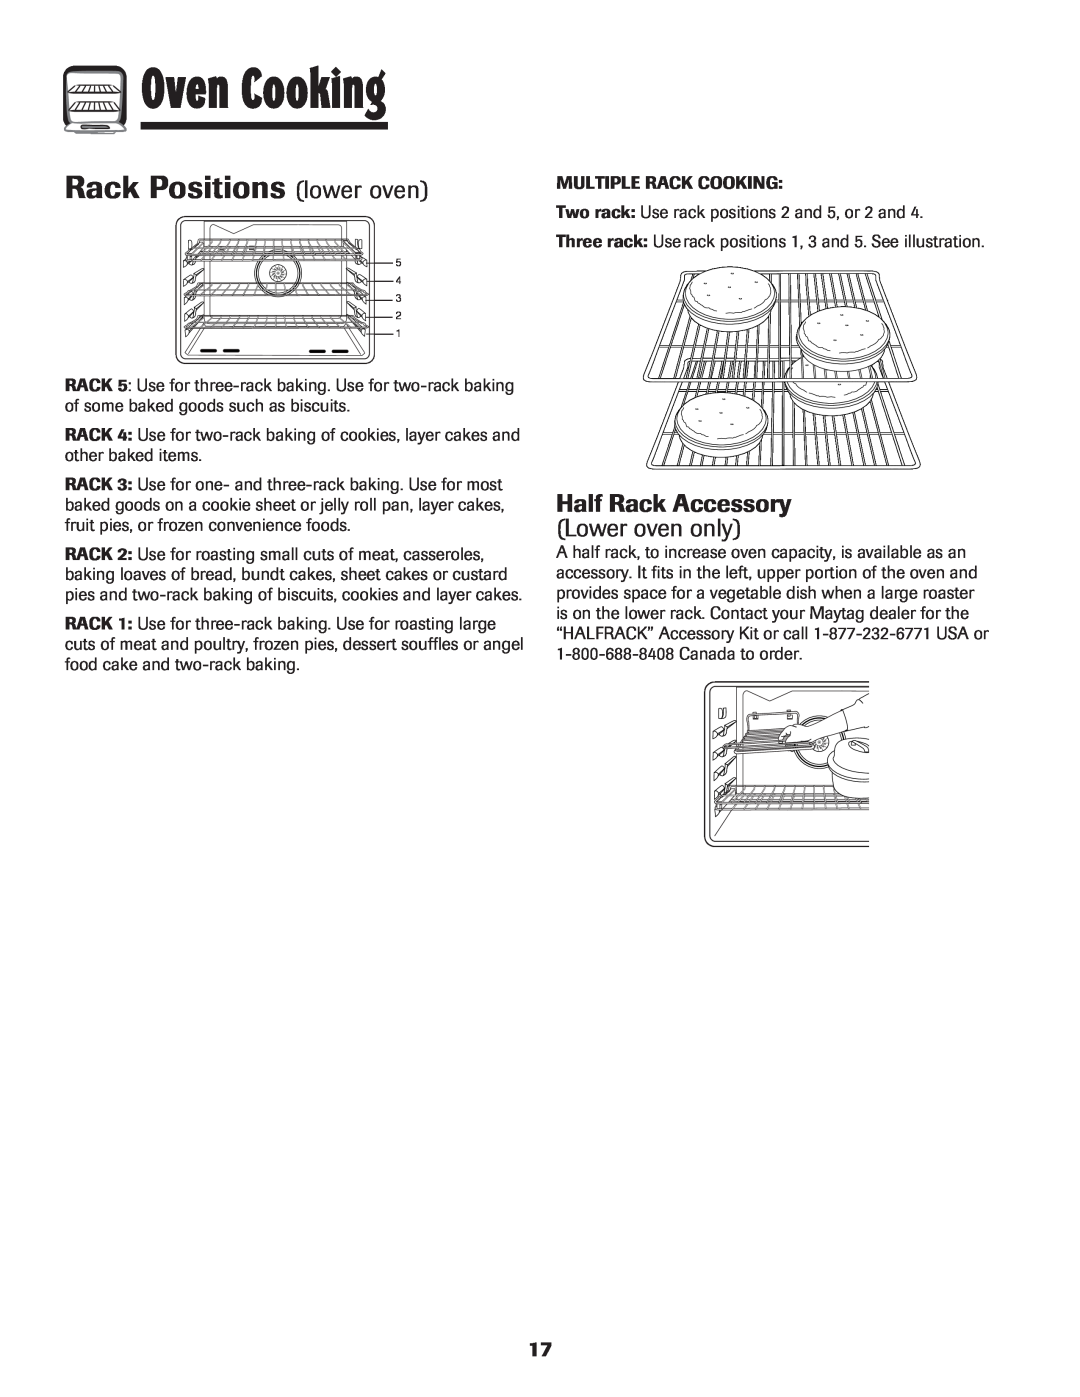 Maytag 850 important safety instructions Rack Positions lower oven, Half Rack Accessory Lower oven only, Oven Cooking 